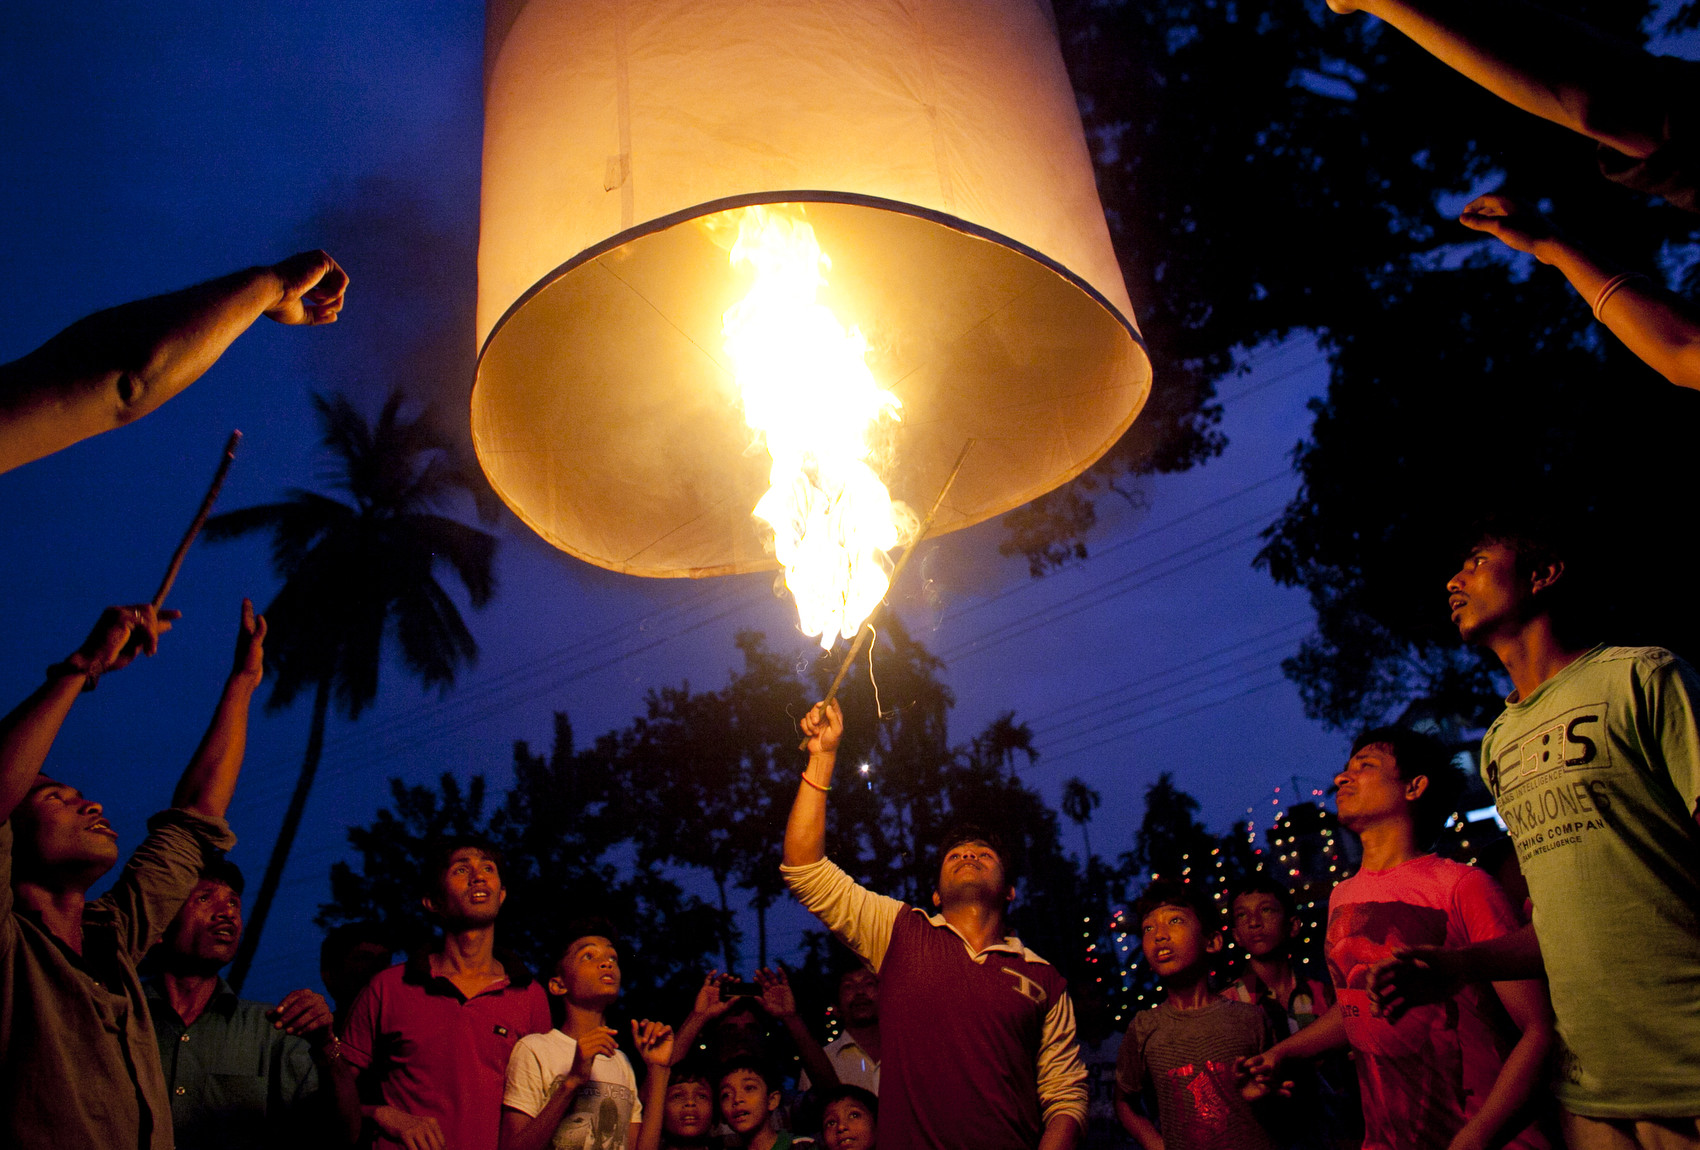 Bangladeshi Buddhists light a large paper balloon into the sky during Probarona Purnima in Ramu, Bangladesh. The Probarona Purnima festival celebrates the conclusion of the three-month long seclusion of the monks inside their monasteries for self-edification. Last year, on September 29th 2012 a muslim mob attacked and destroyed temples and homes of Buddhists after an anonymous person posted a photograph of a desecrated Quran on a local Buddhist boy's facebook wall. The community did not participate in Probarona Purnima last year in protest of the attacks. 